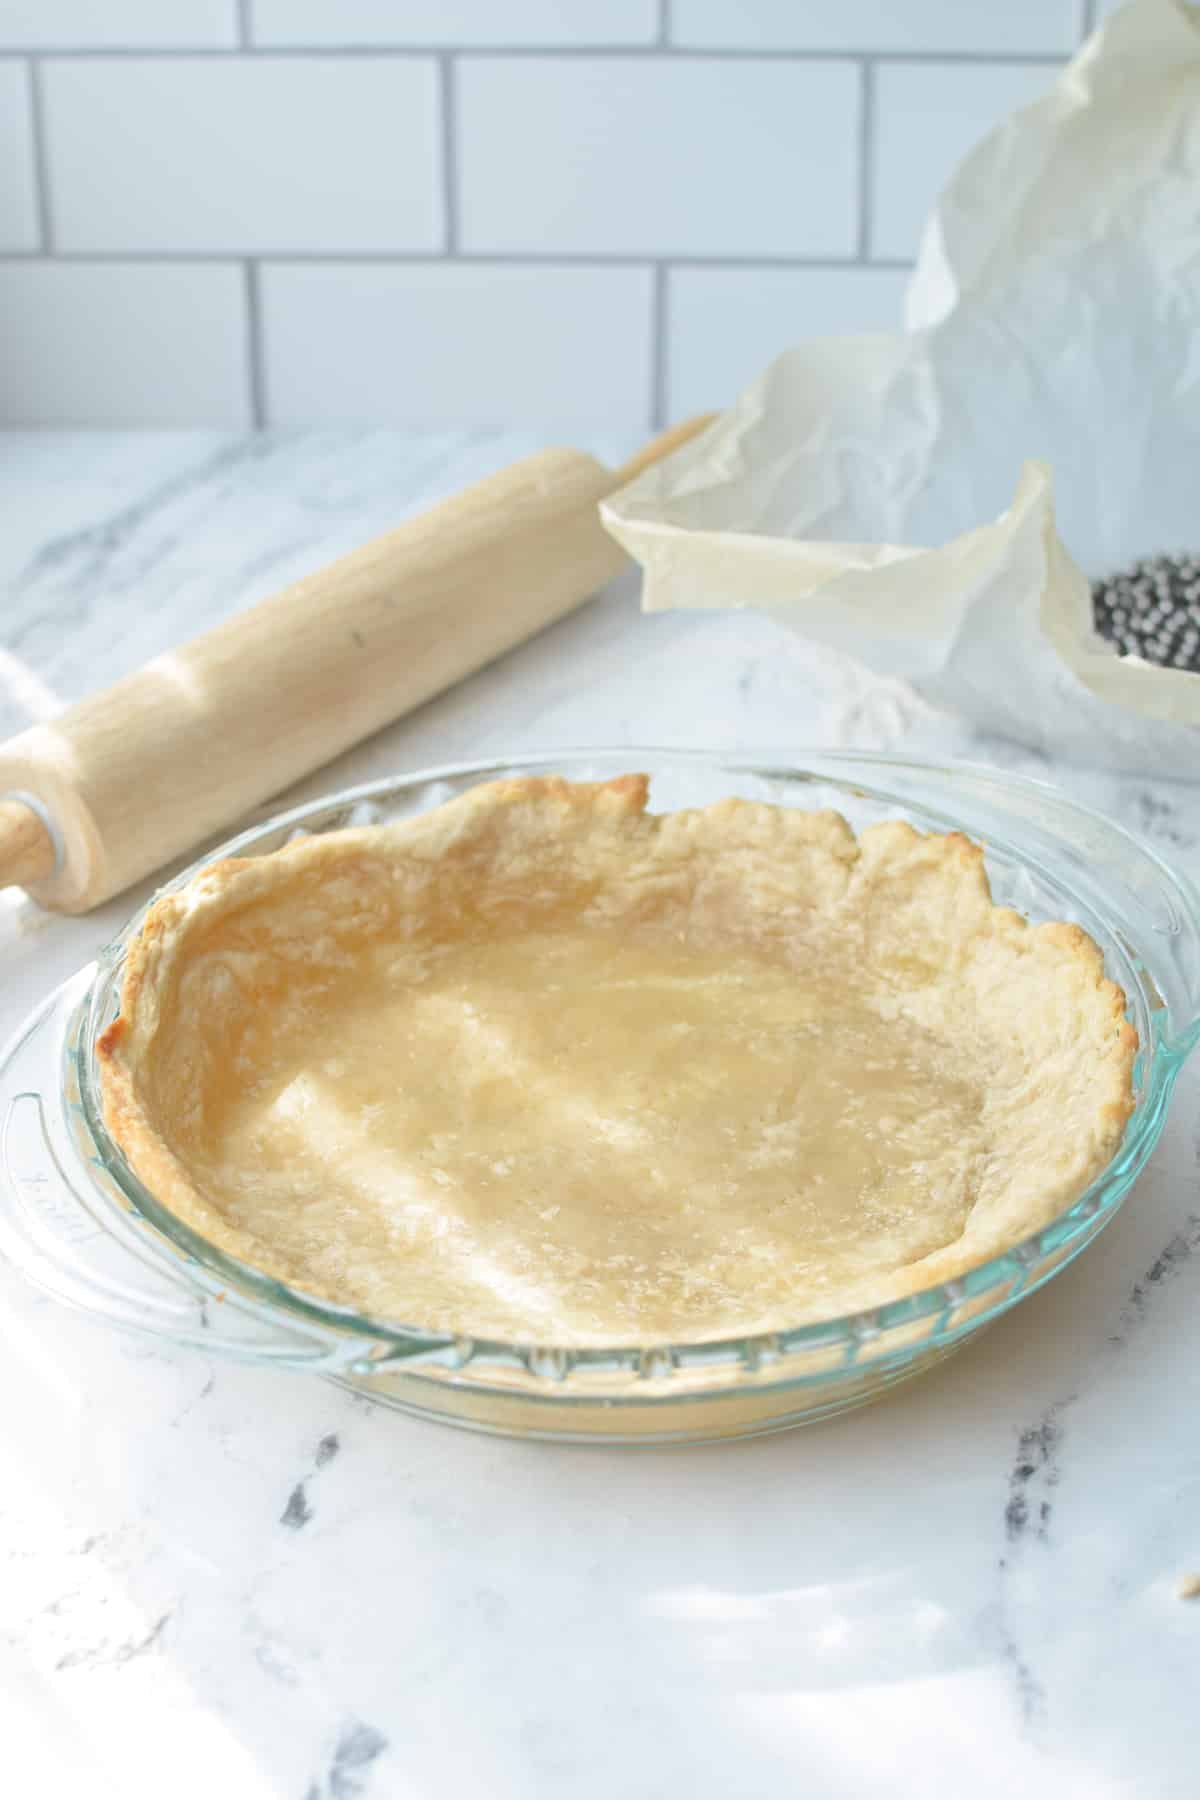 A pie crust partially baked in a pie dish.